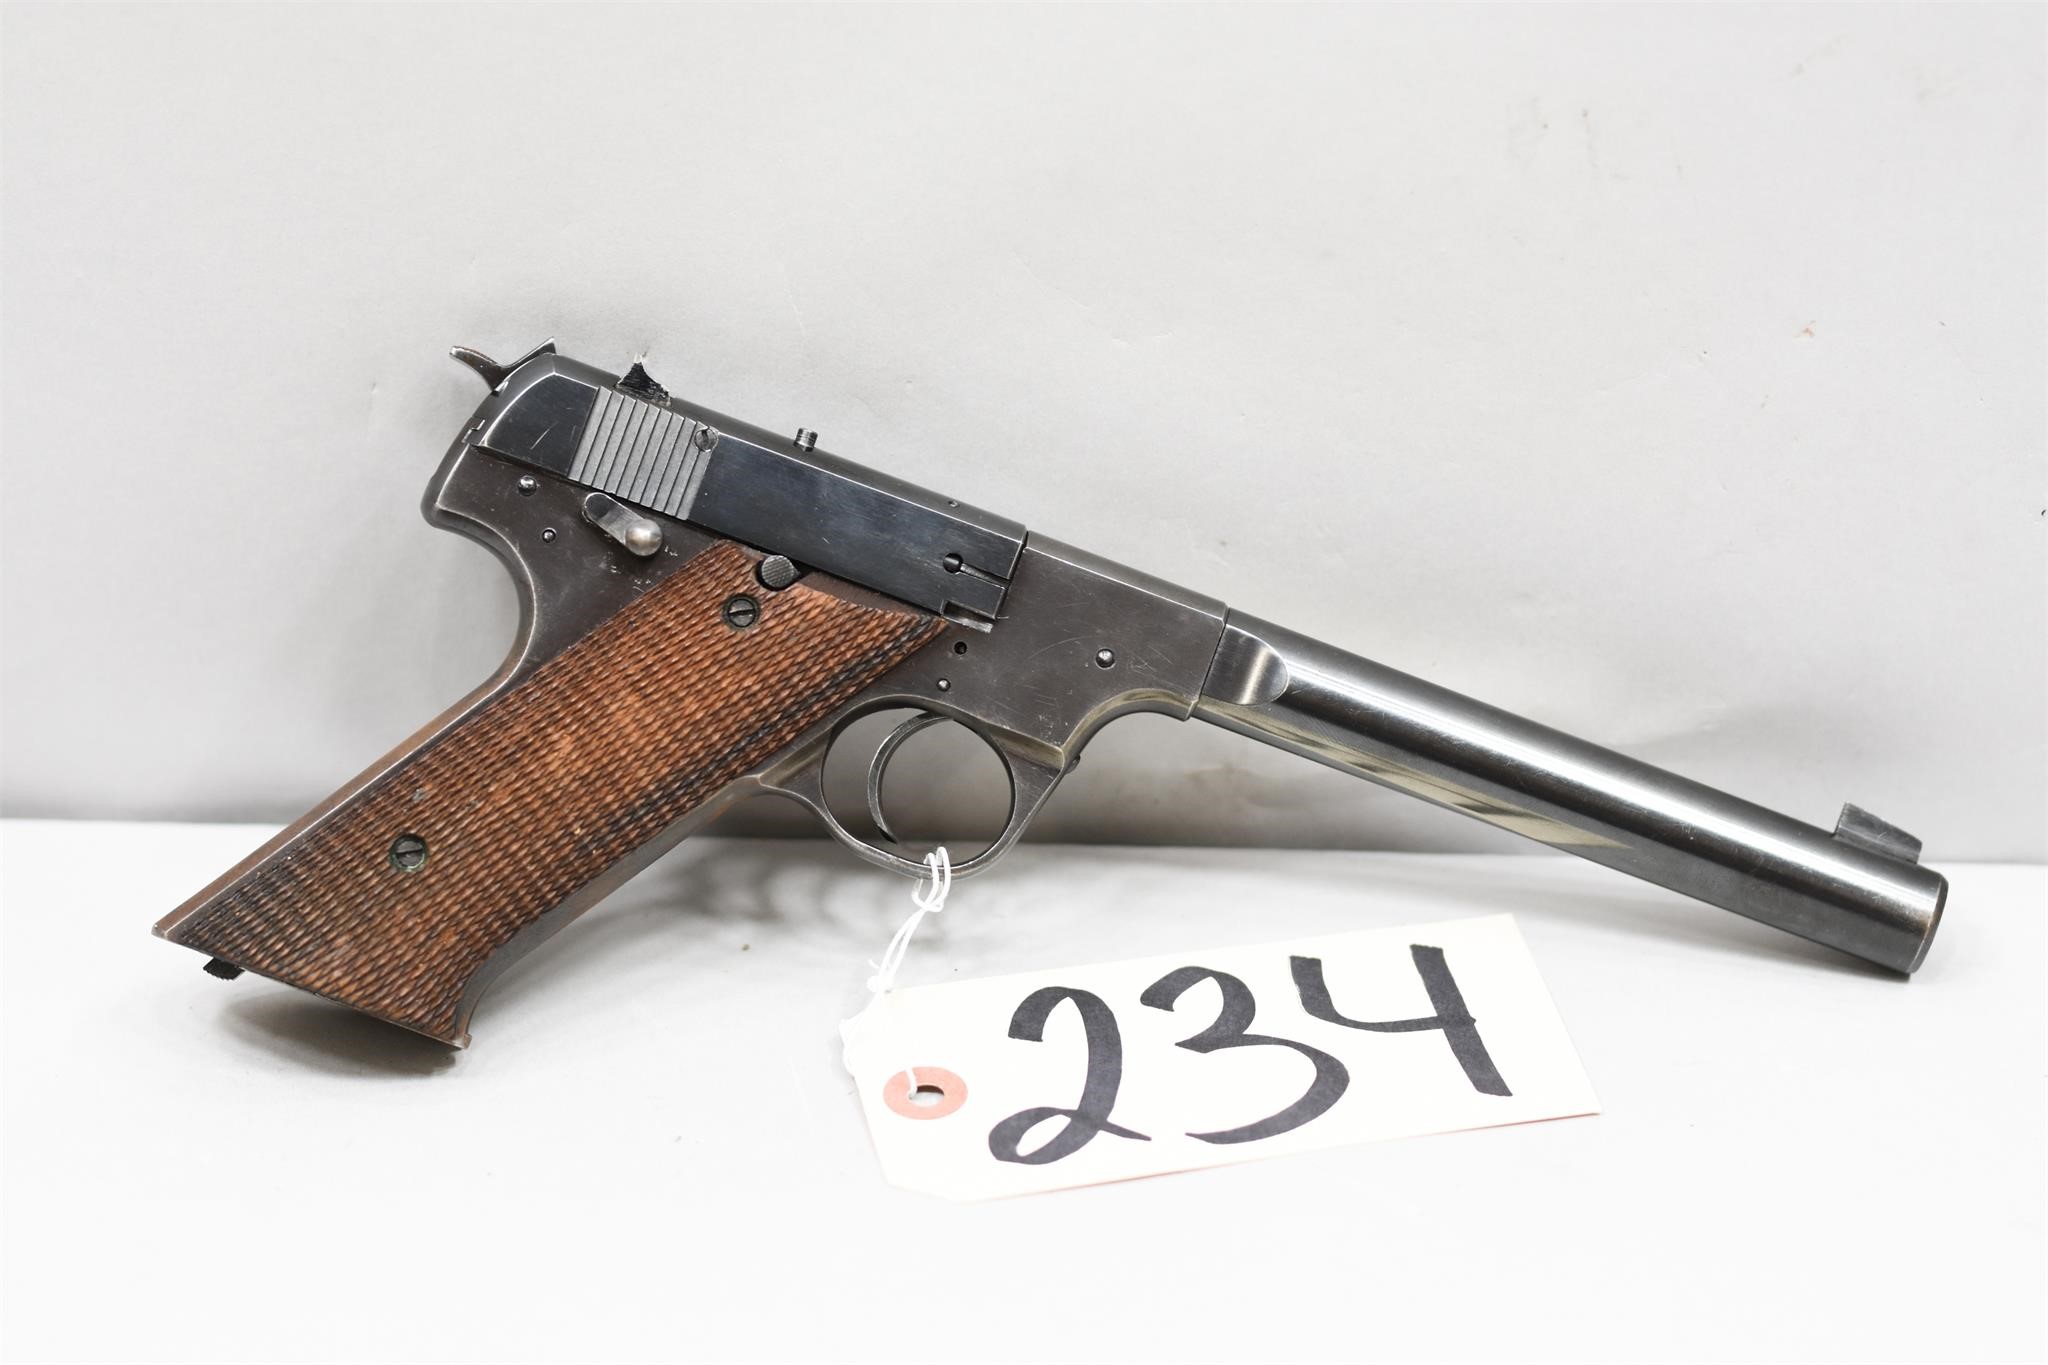 8/21/2021 Firearms & Sporting Goods Auction